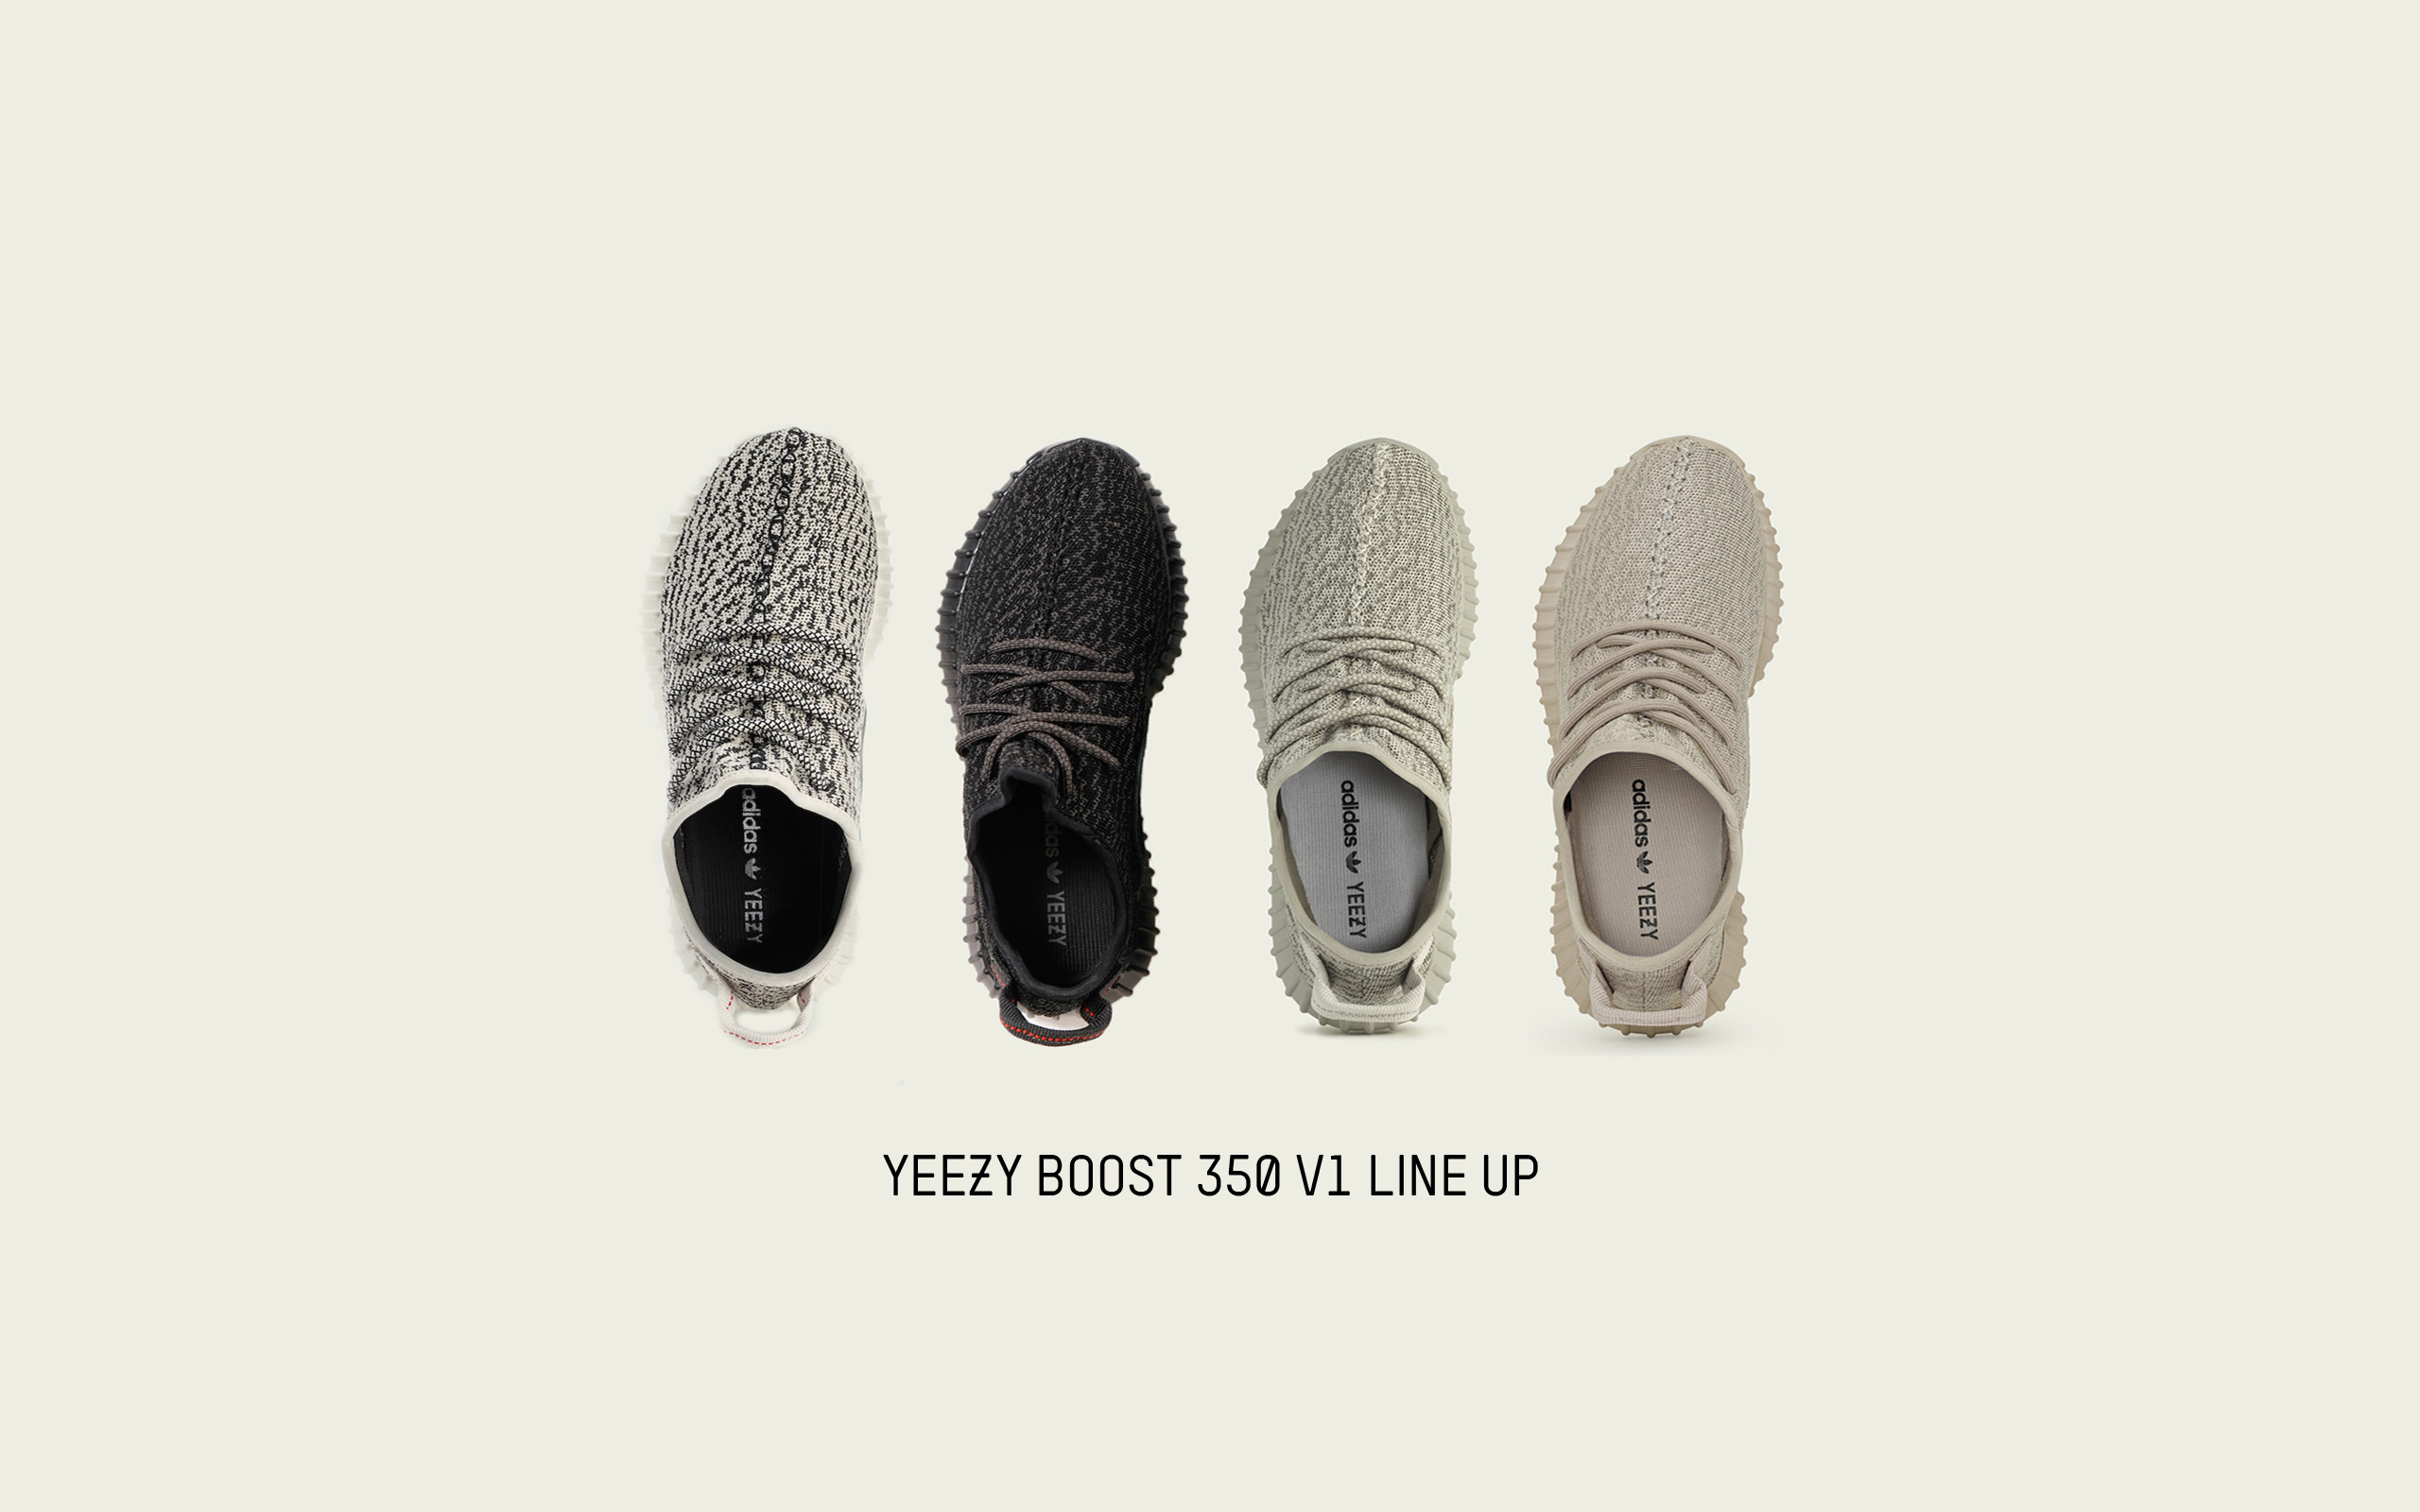 Yeezy Boost 350 V1 Lineup - 2560x1600 